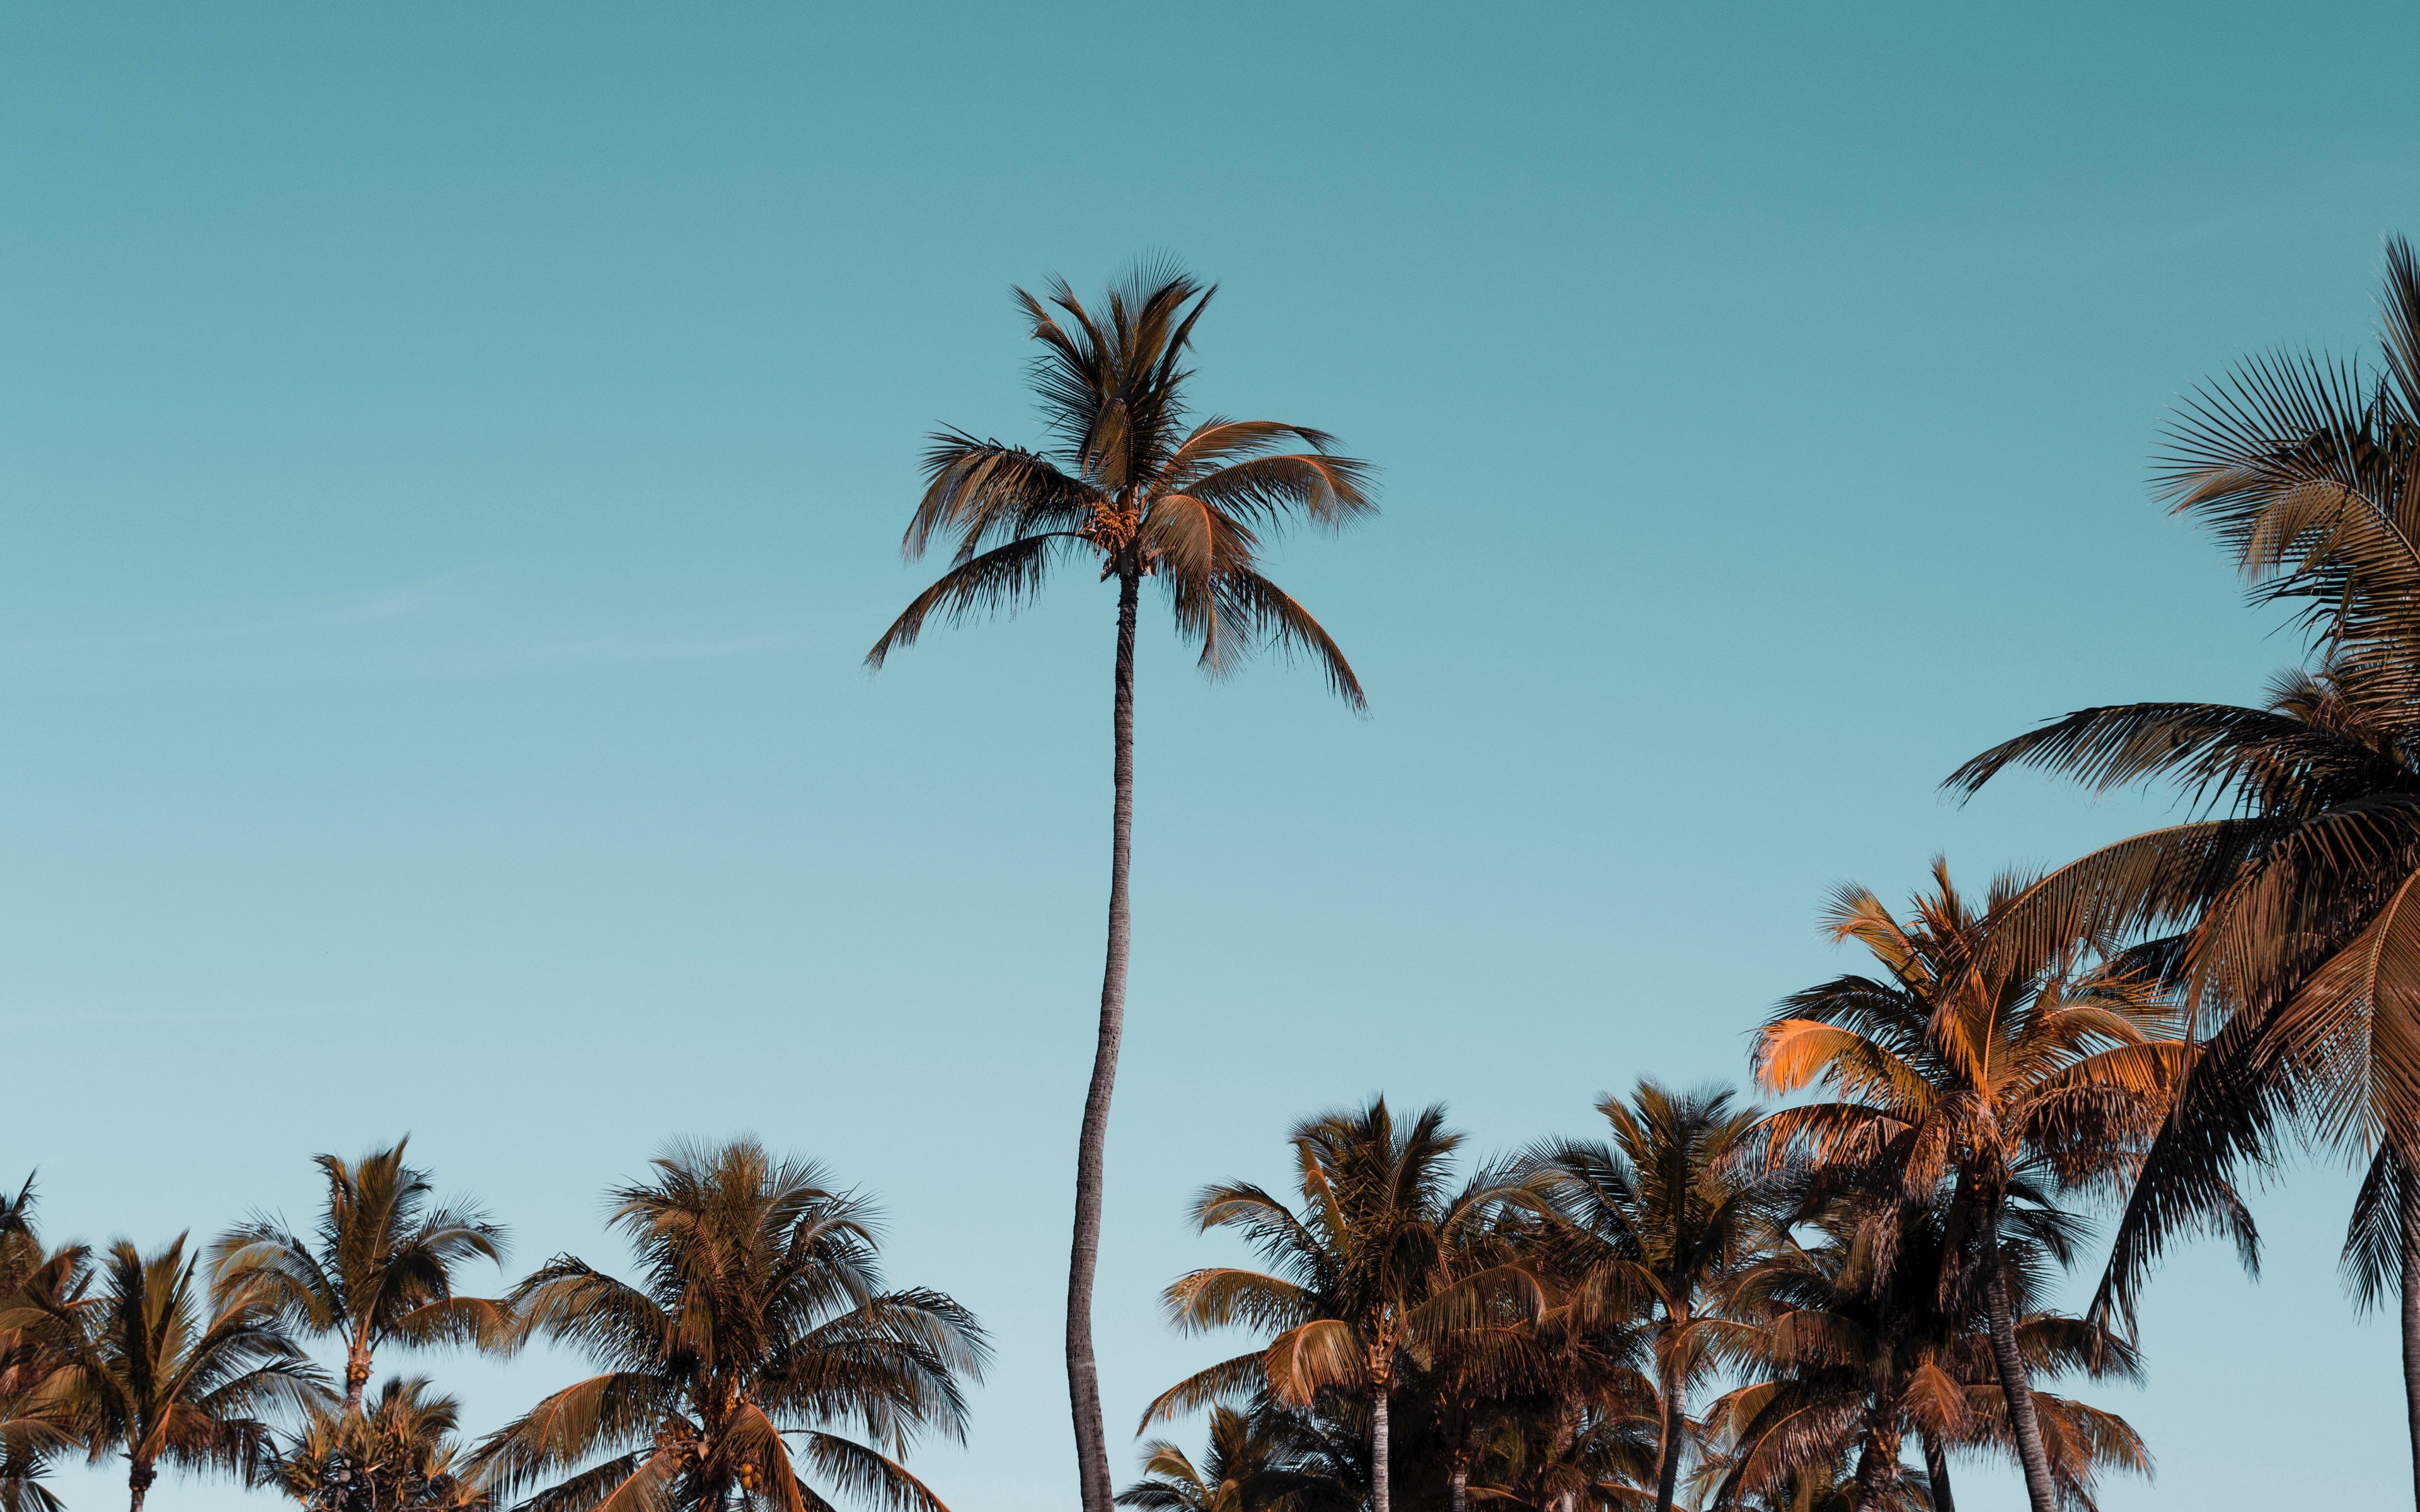 Download wallpaper 3840x2400 palm trees, trees, crowns, sky, tropical 4k ultra HD 16:10 HD background